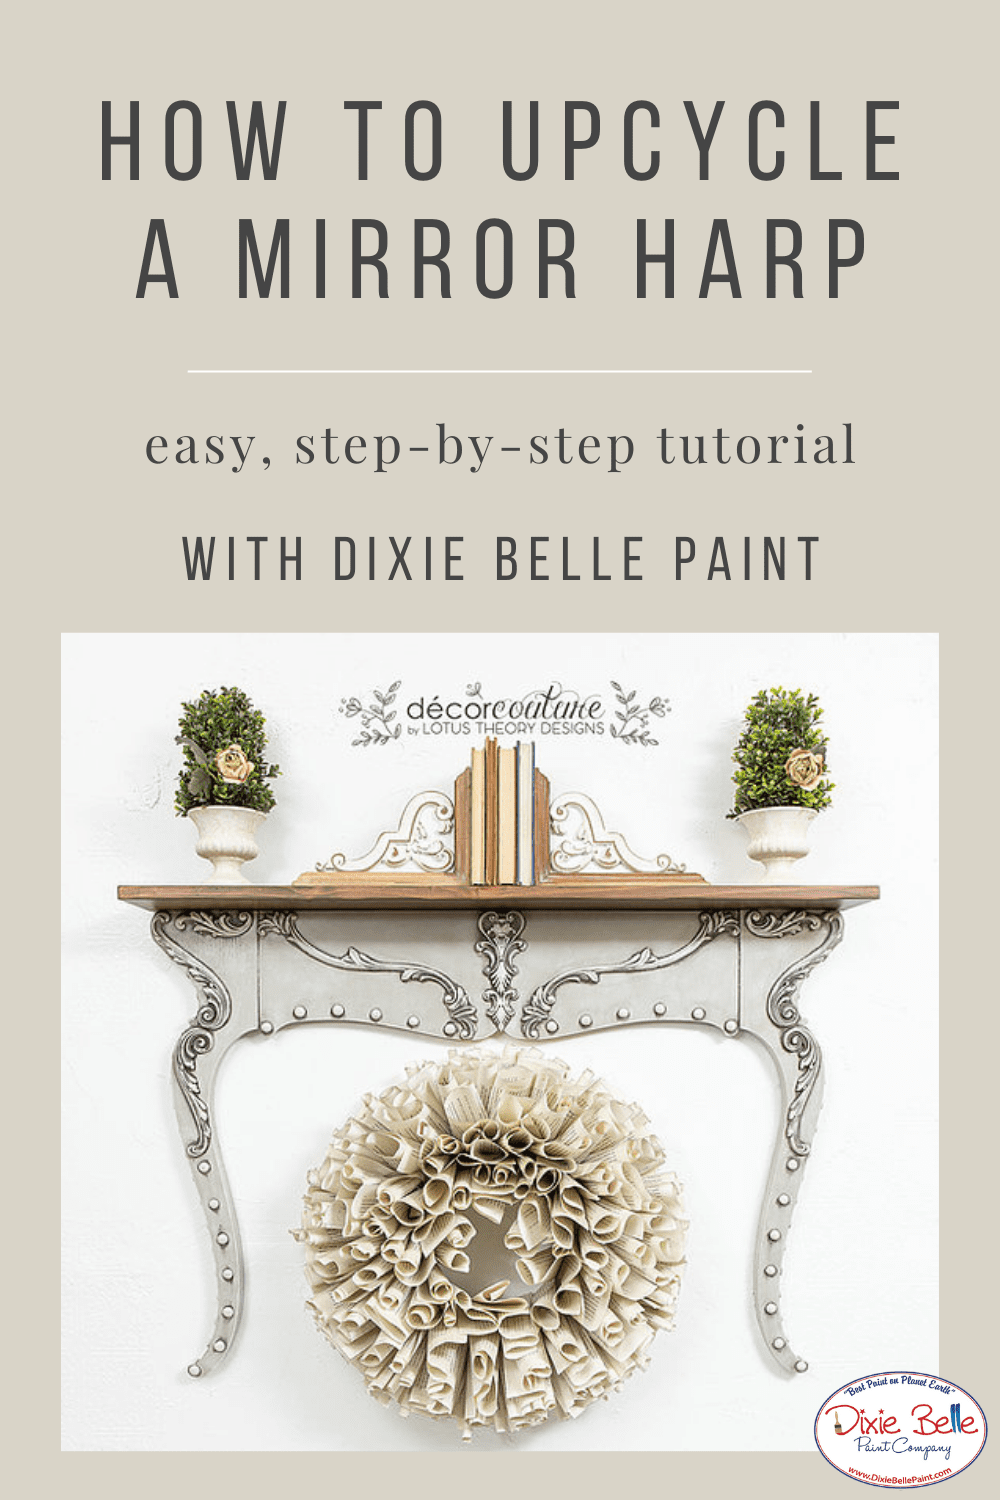 How to Upcycle a Mirror Harp